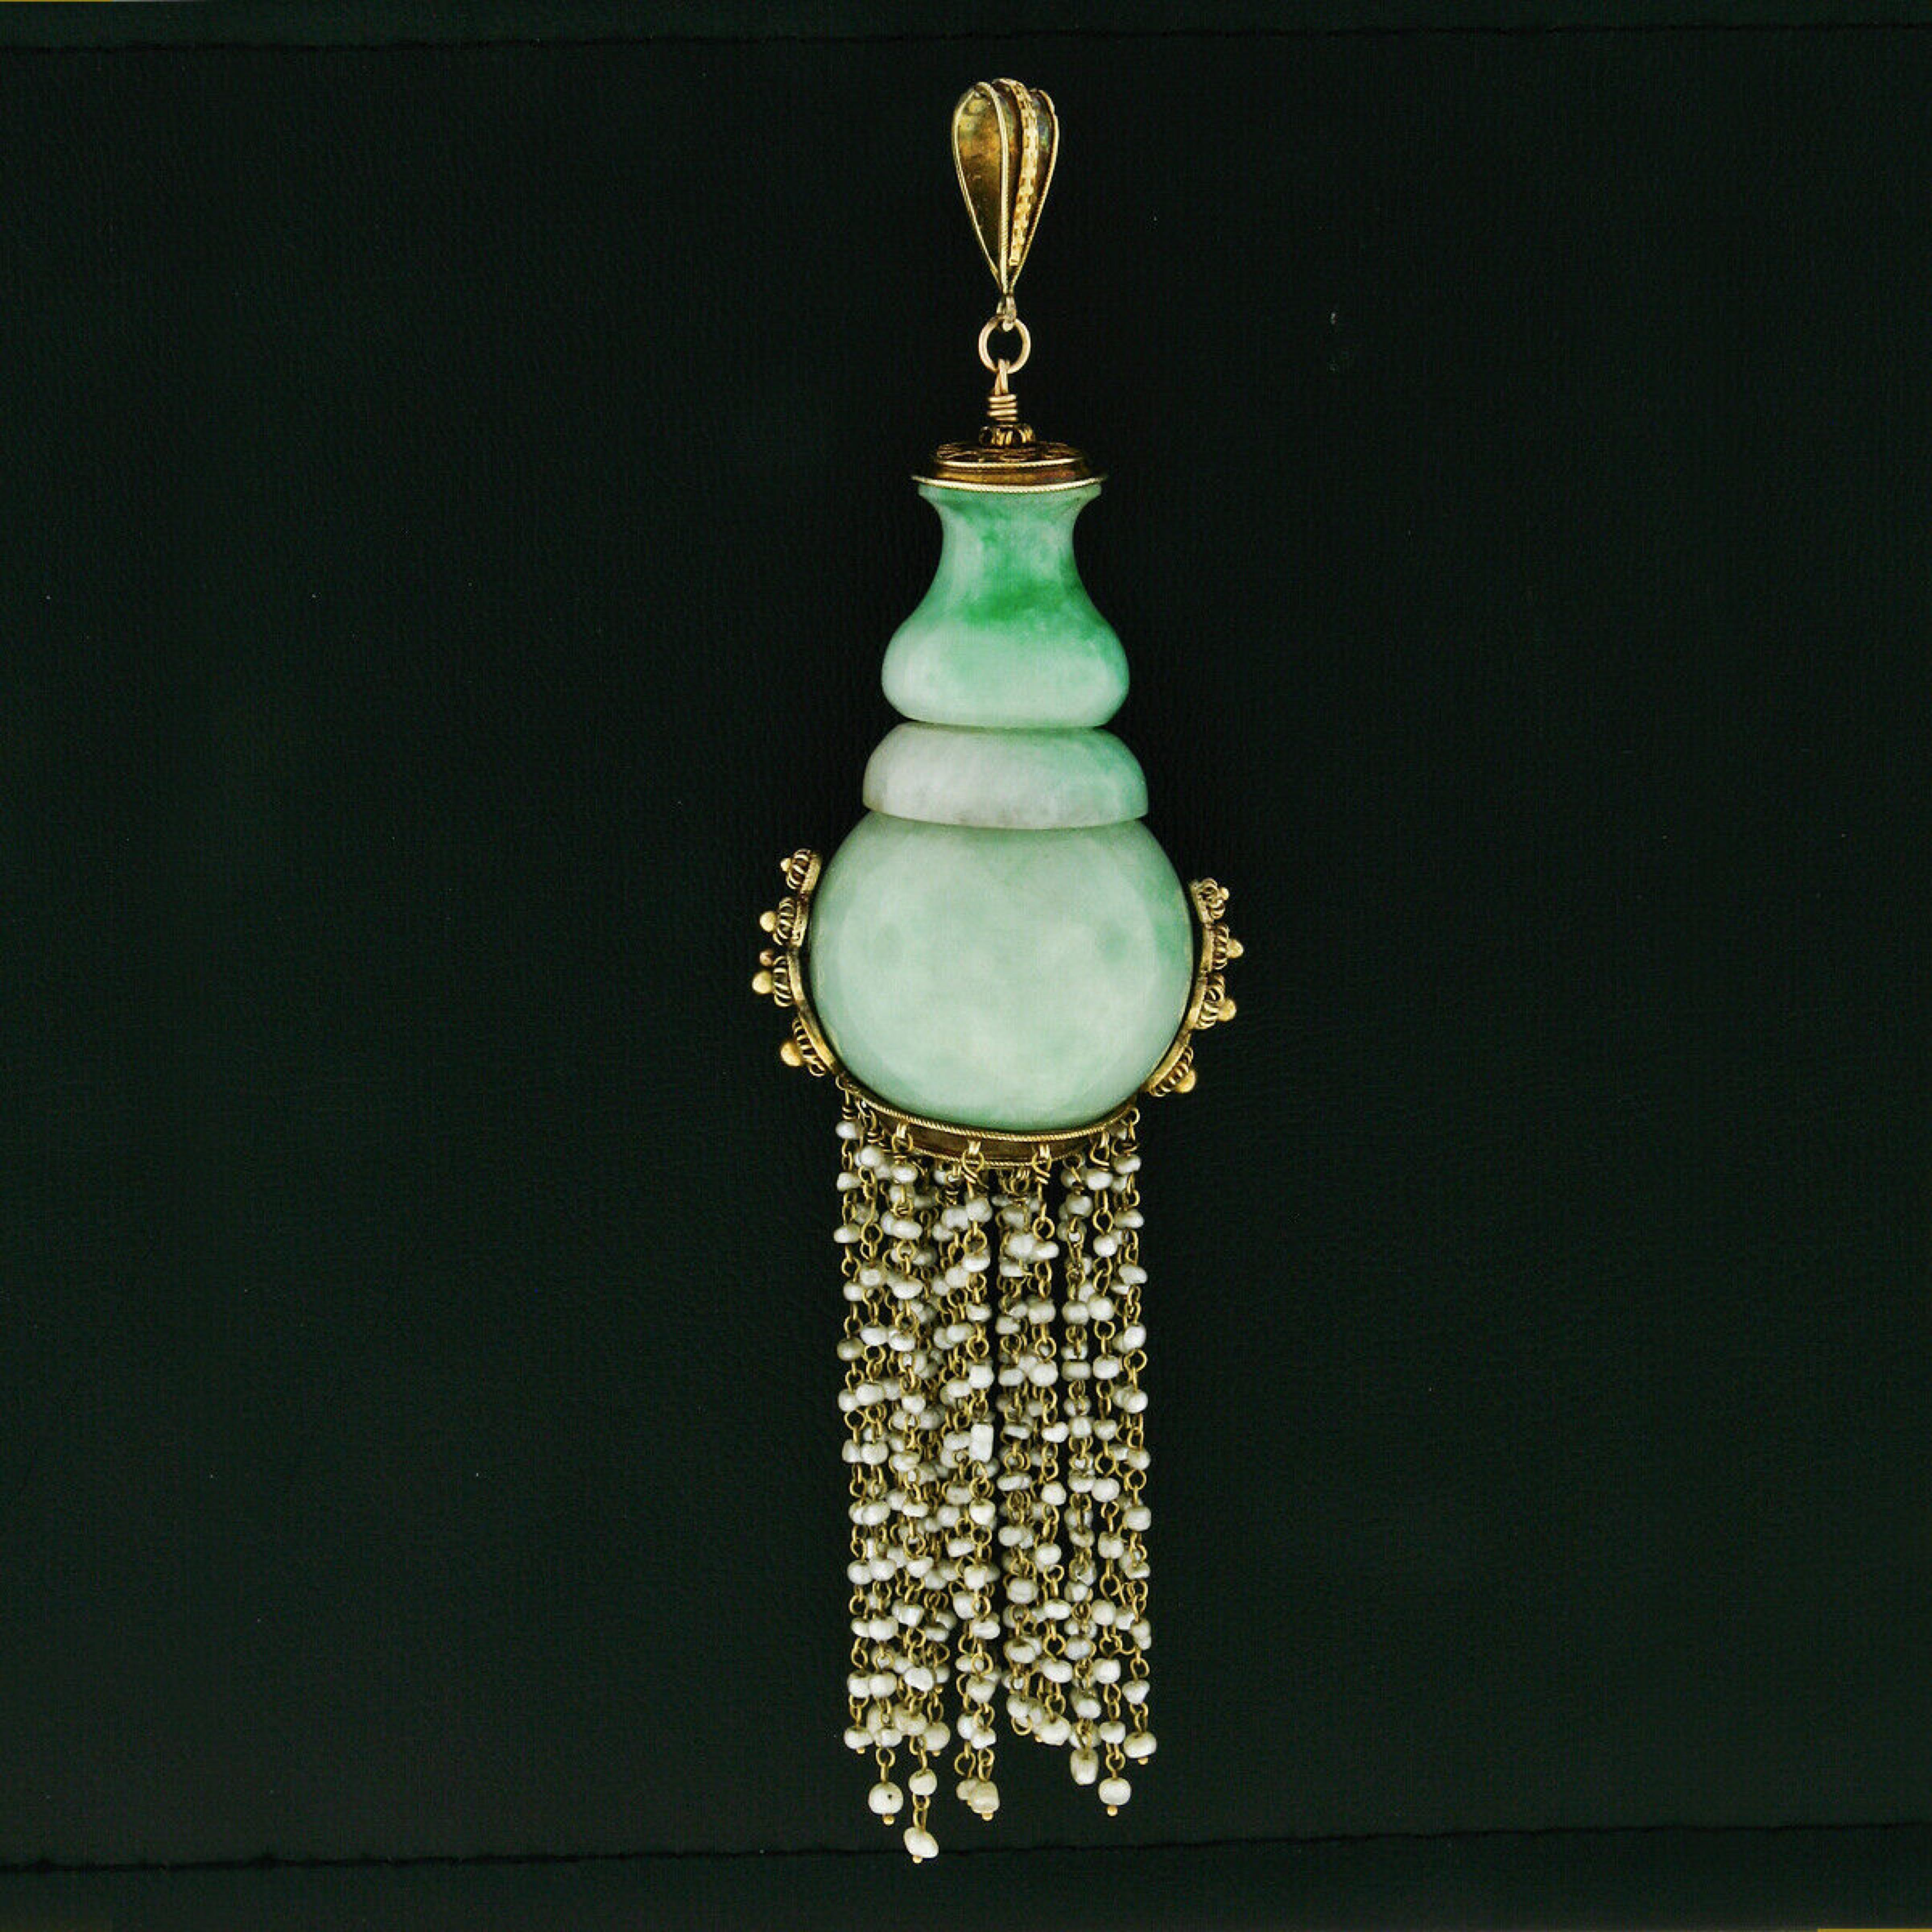 This large antique pendant was crafted from solid 14k yellow gold during the Victorian era and features 2 large natural jadeite stones which are strung together. One of the 2 jadeite stones was randomly selected by GIA for testing and has been